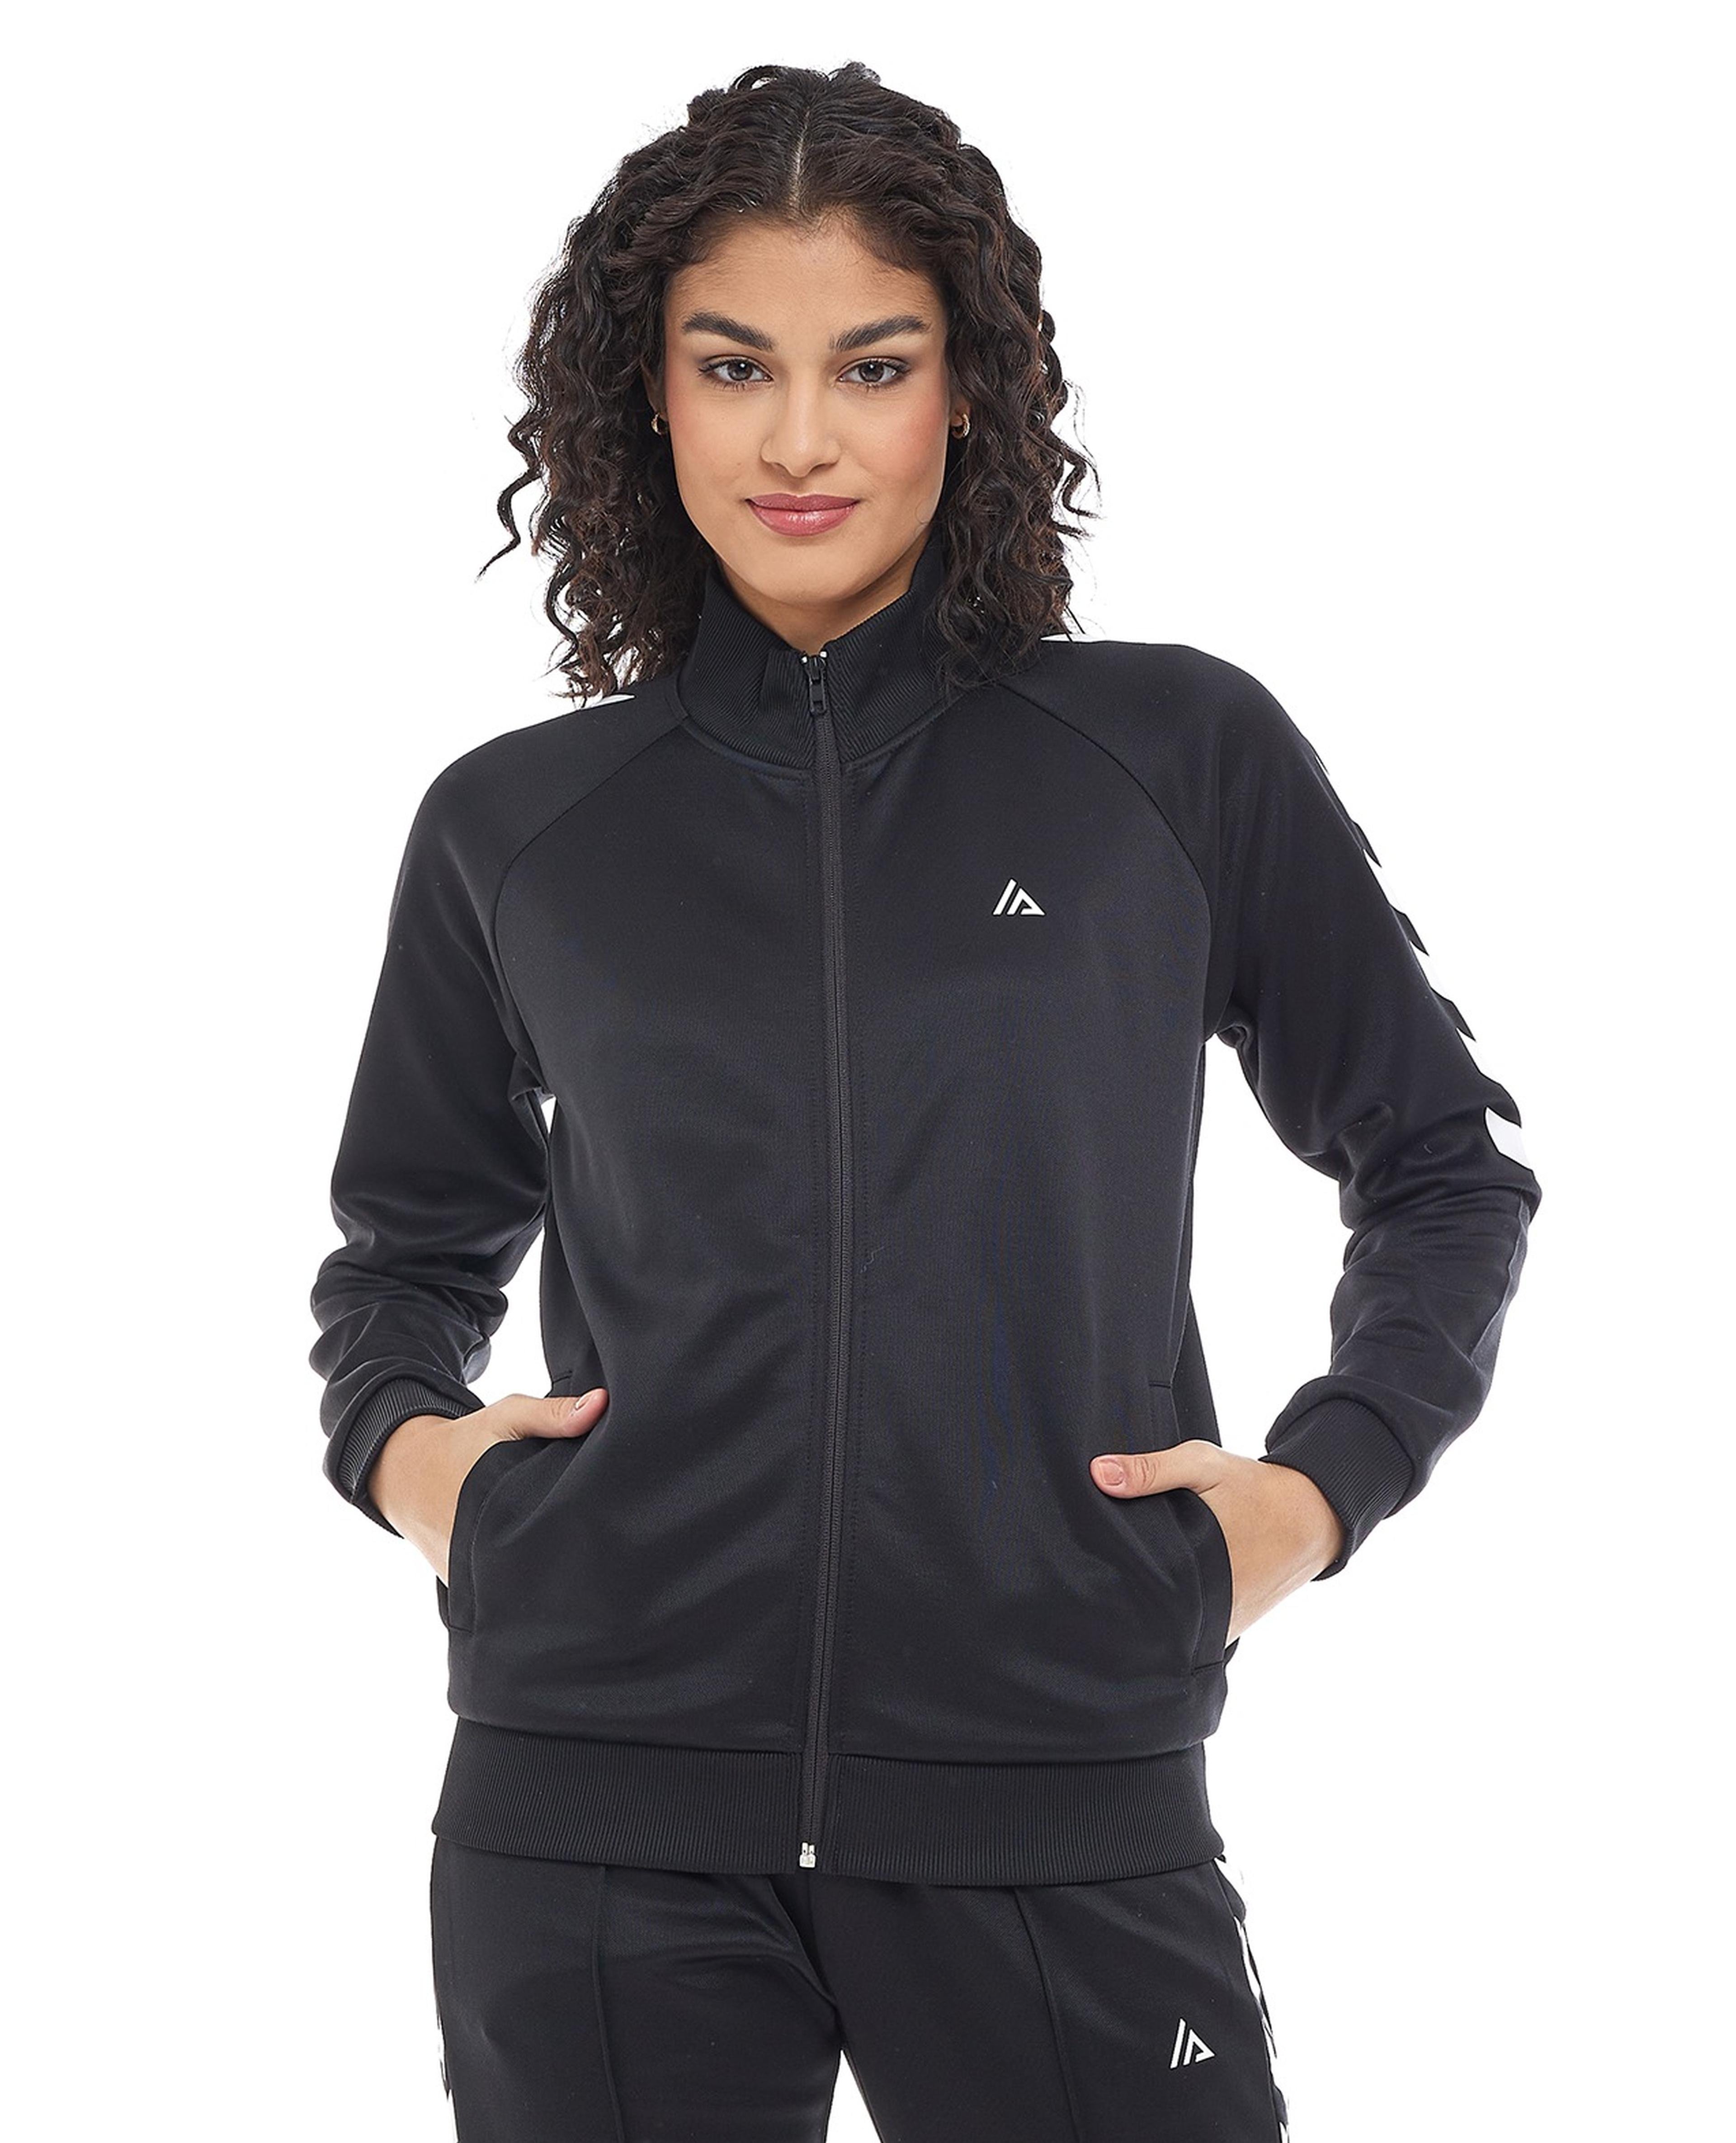 Printed Track Jacket with Zipper Closure